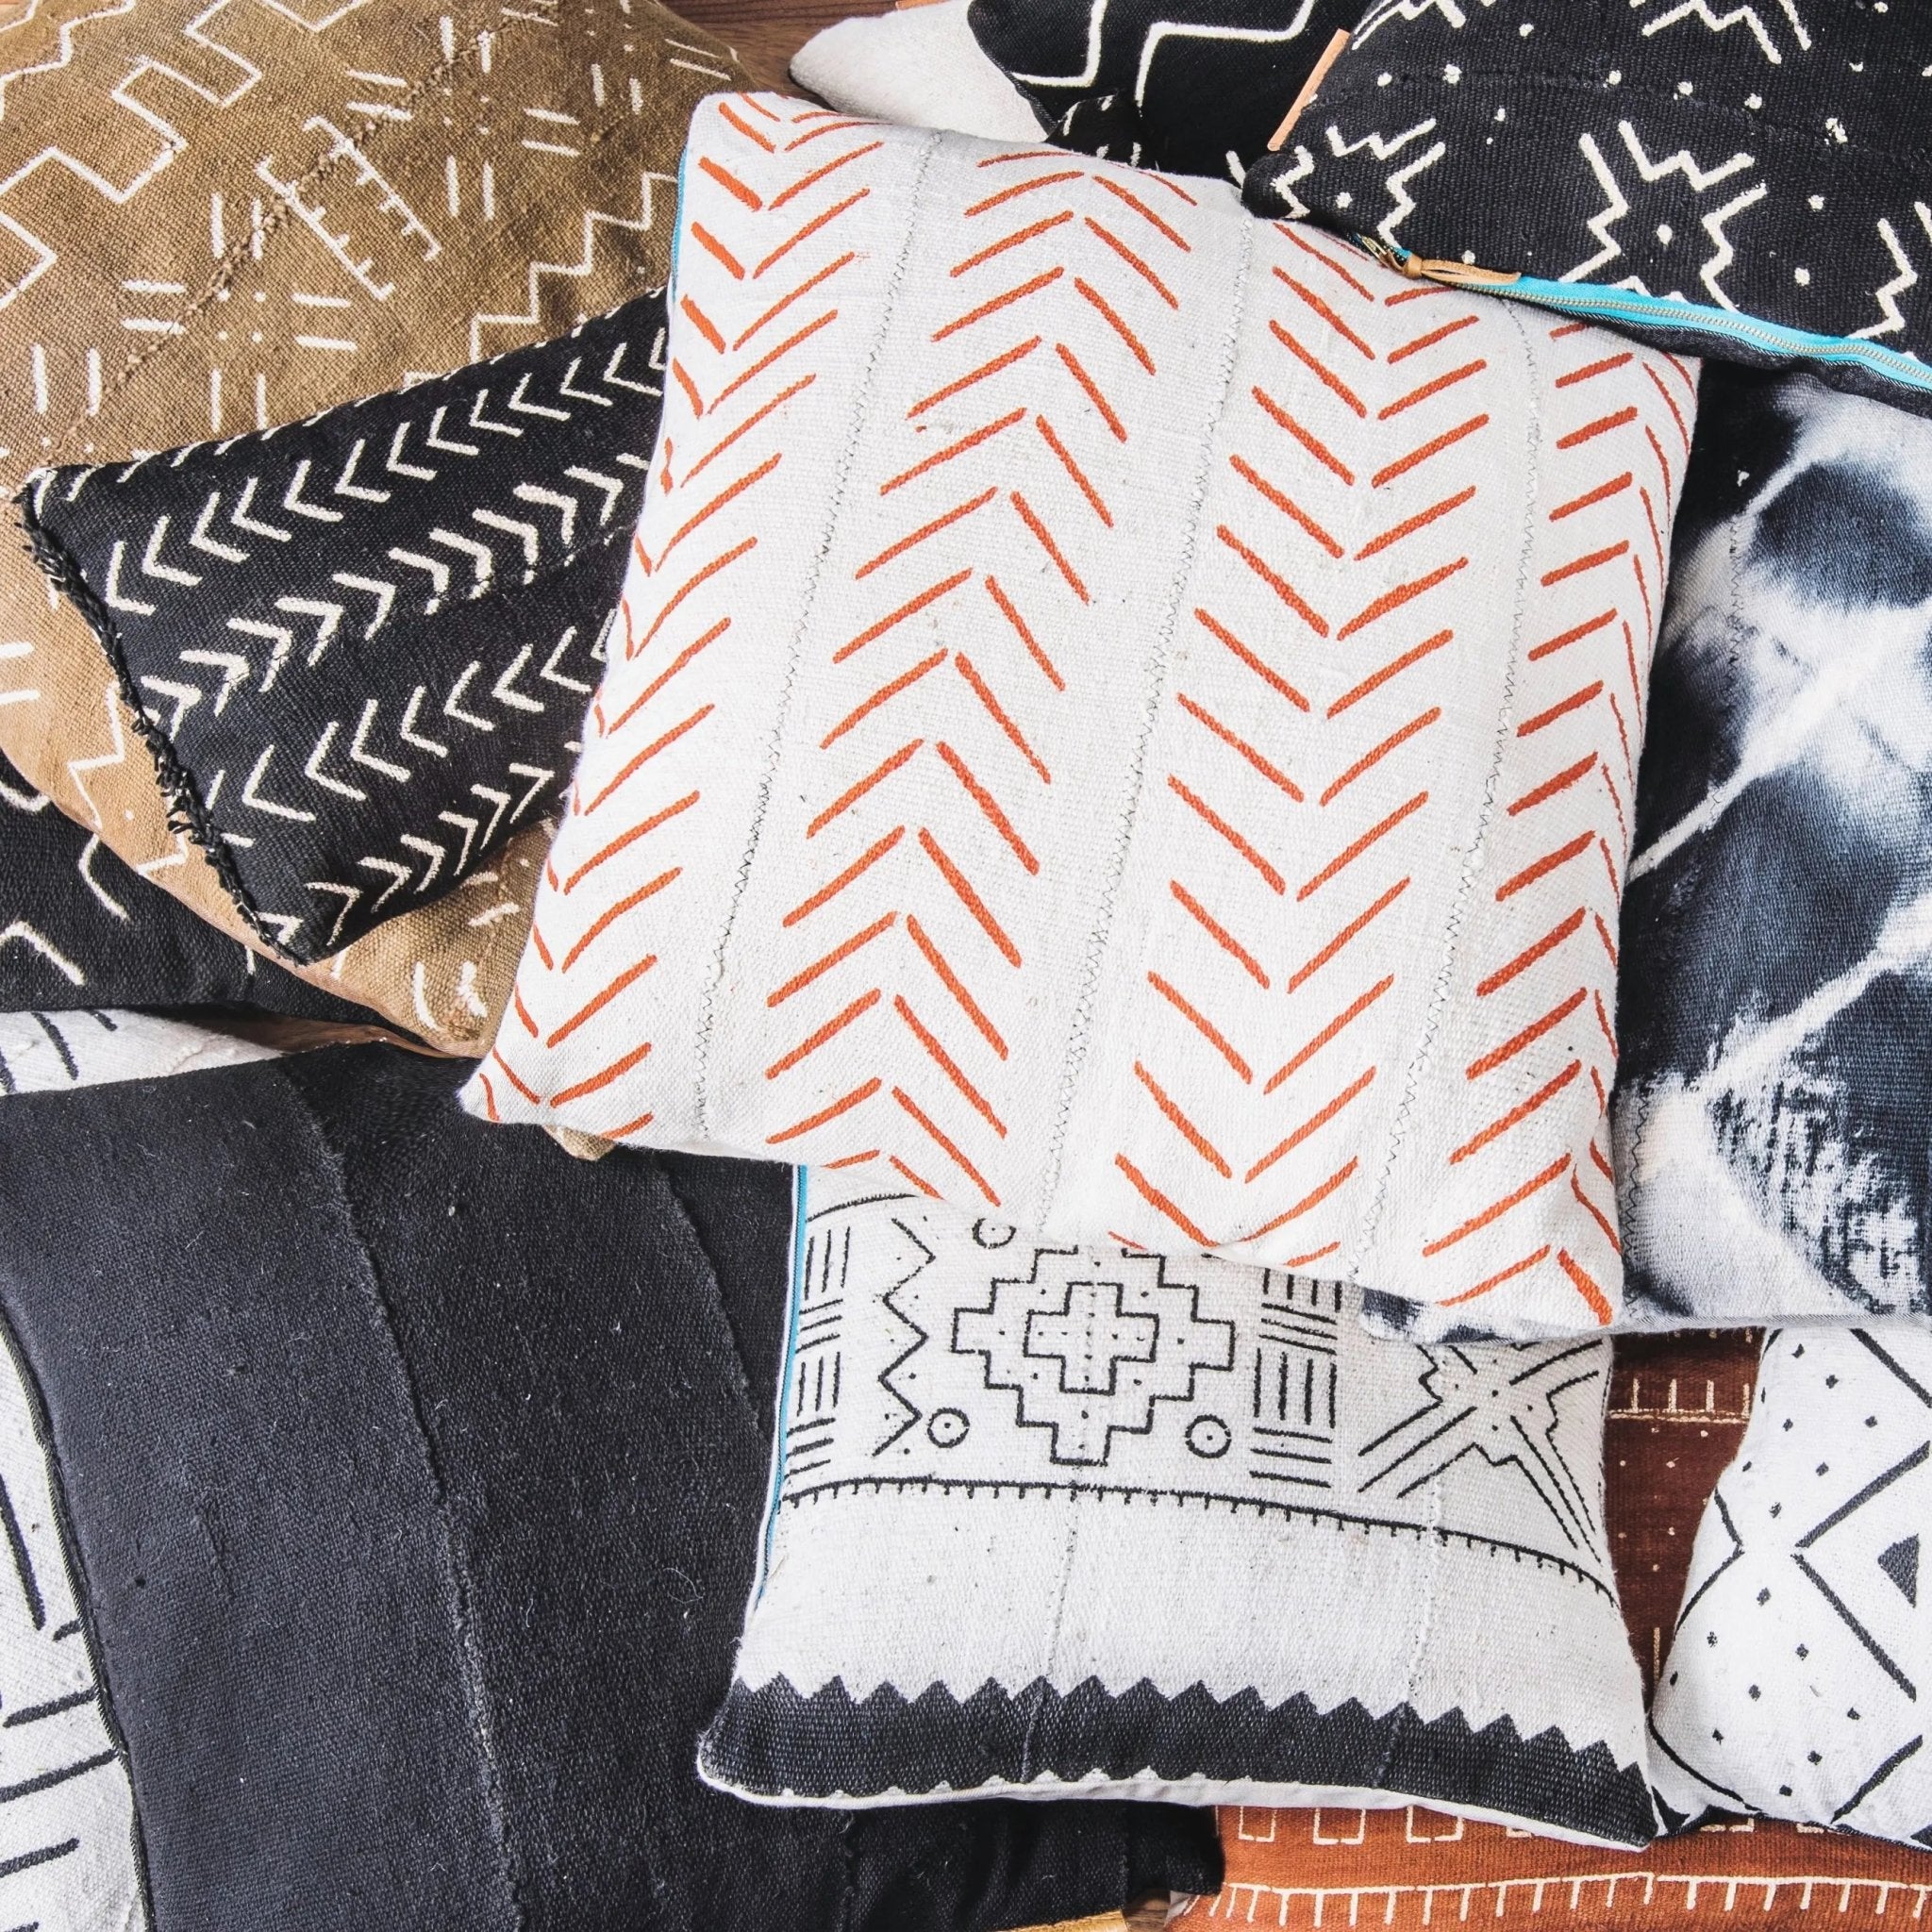 pile of geometric pillows in black white orange and gold with zig zag patterns